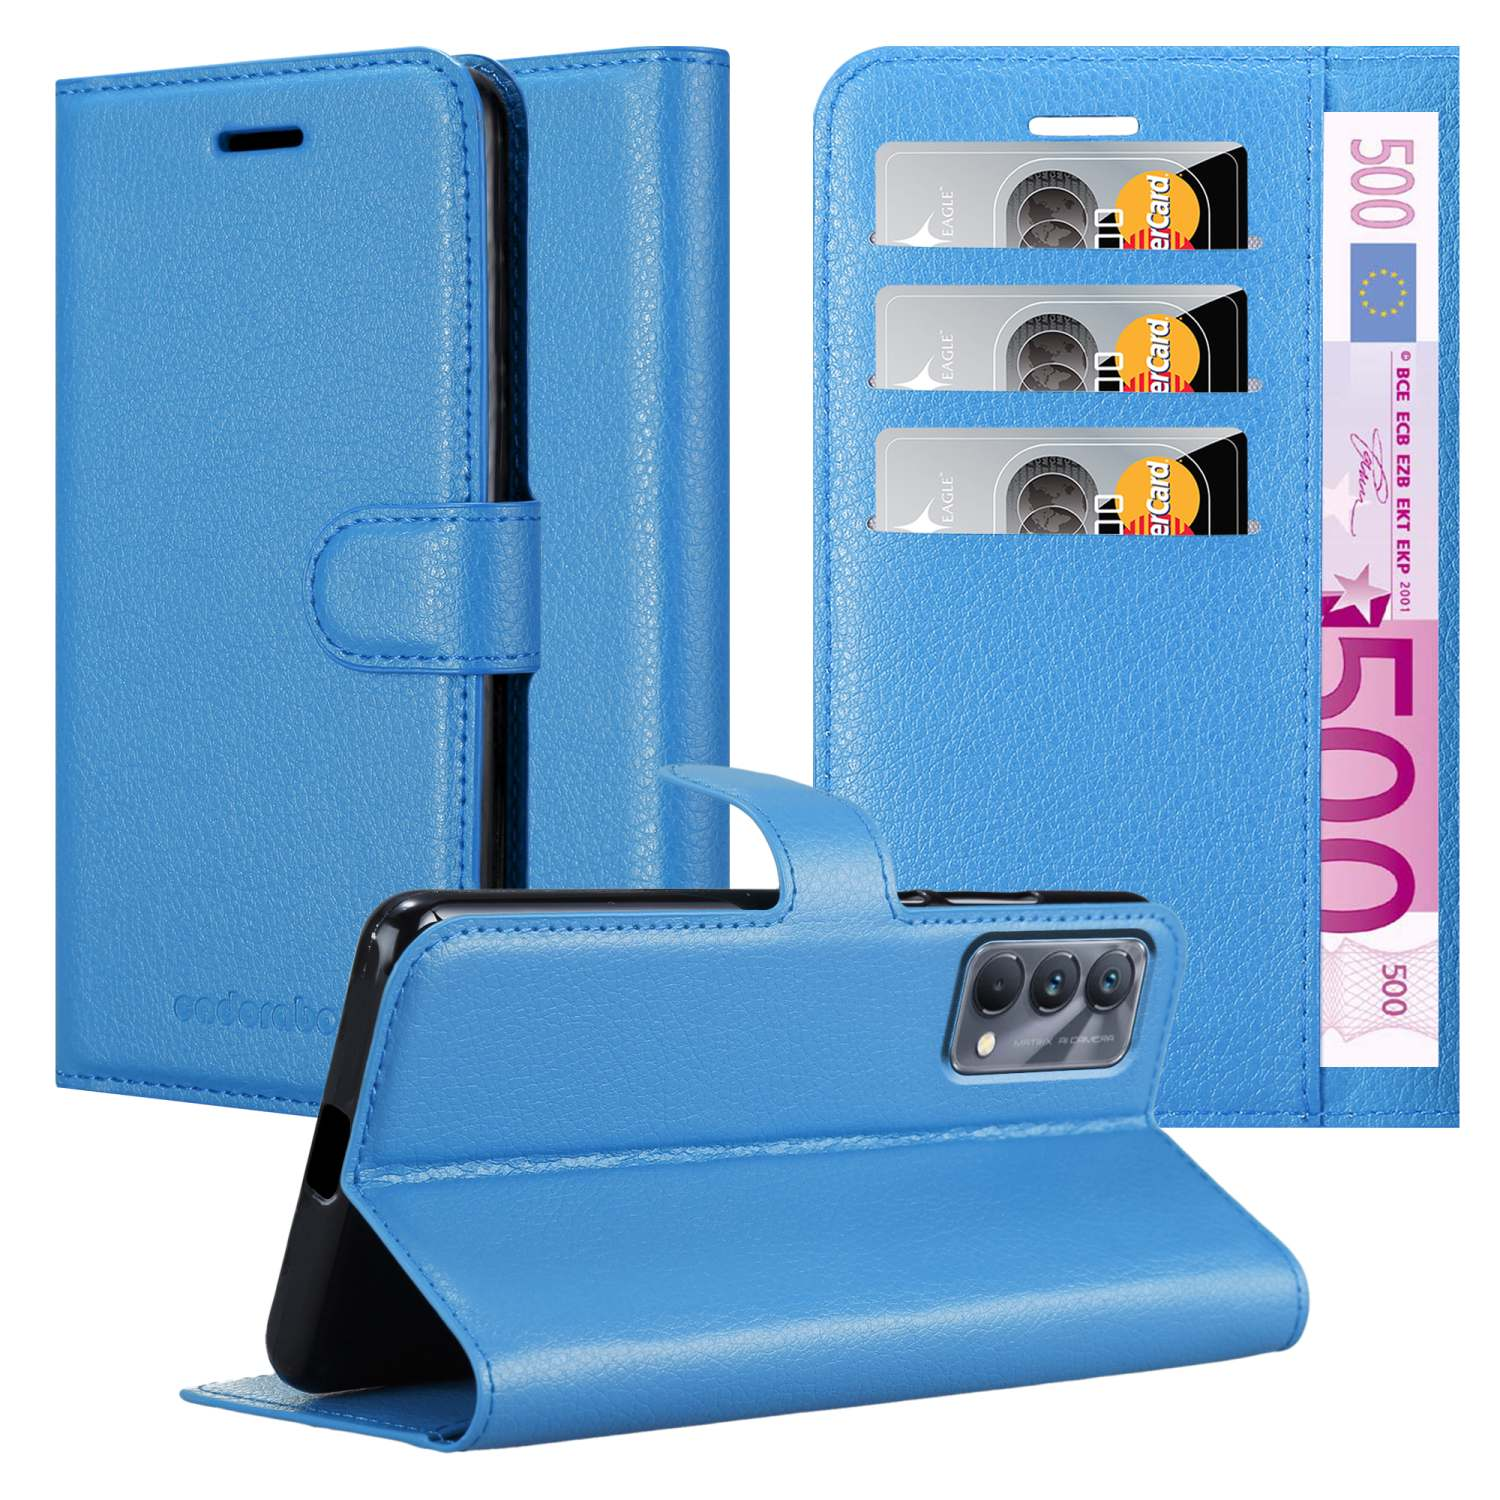 GT PASTELL Realme, Hülle Bookcover, Book Standfunktion, BLAU Master, CADORABO